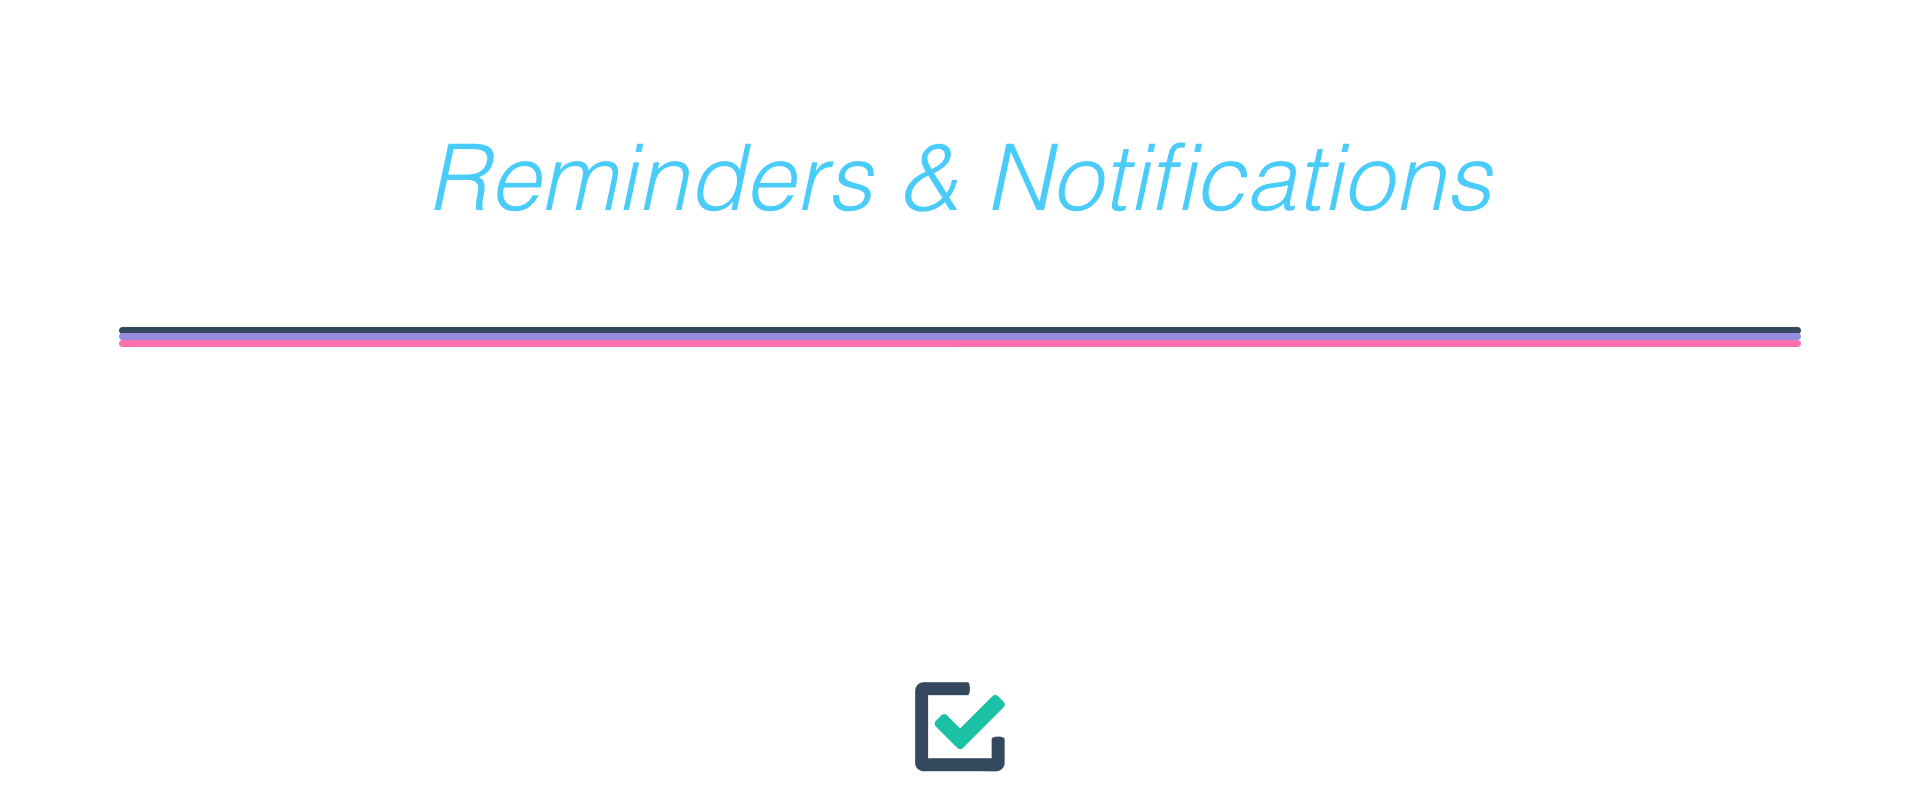 Reminders notifications